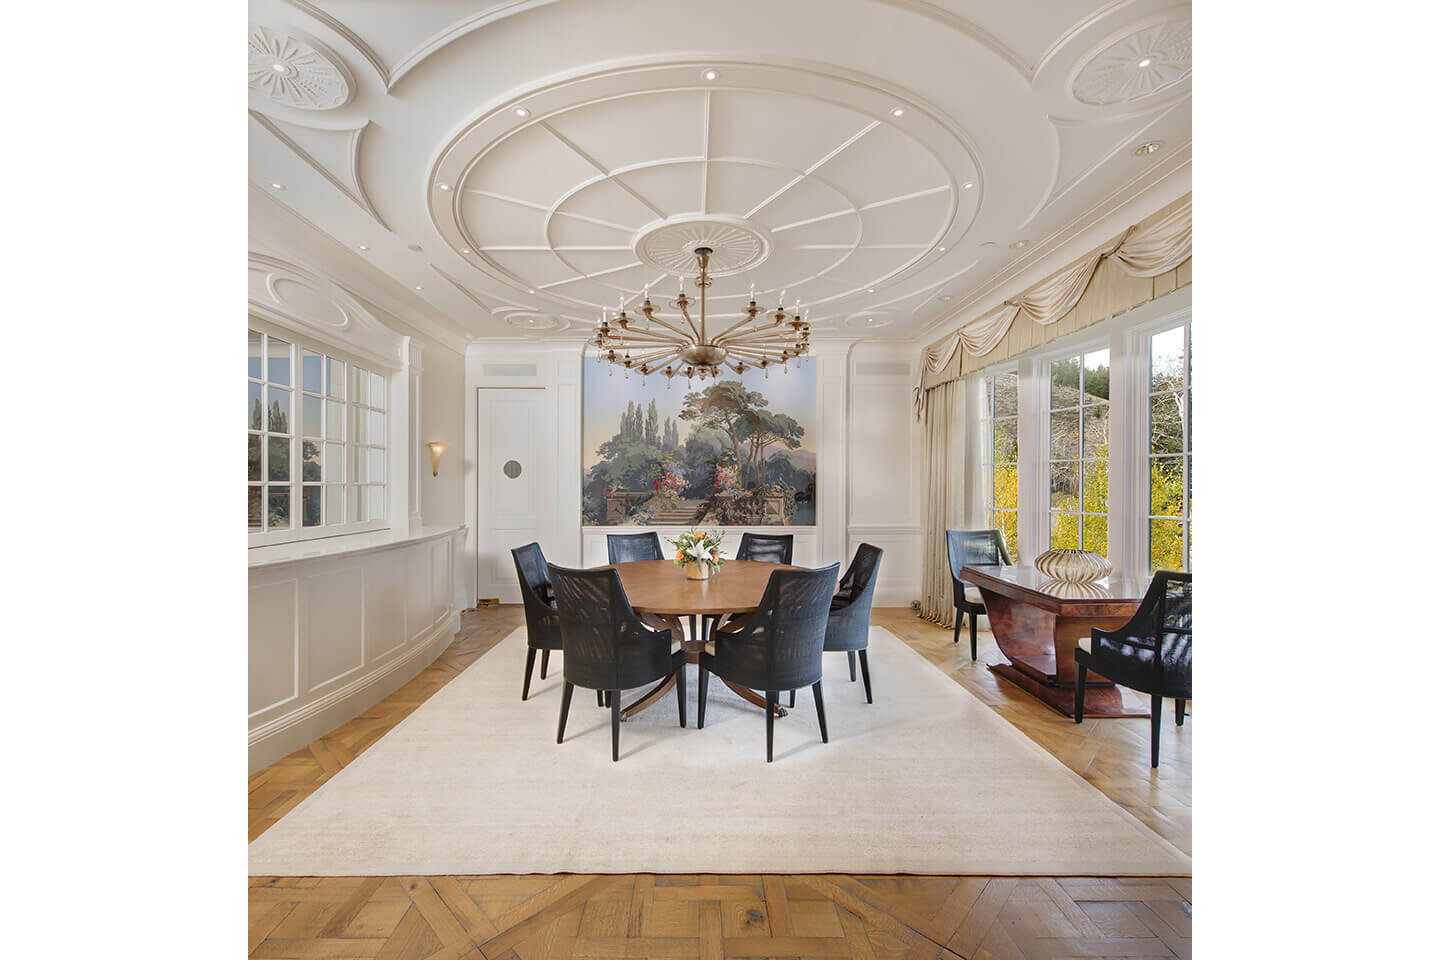 Dining room with architectural ceiling mouldings